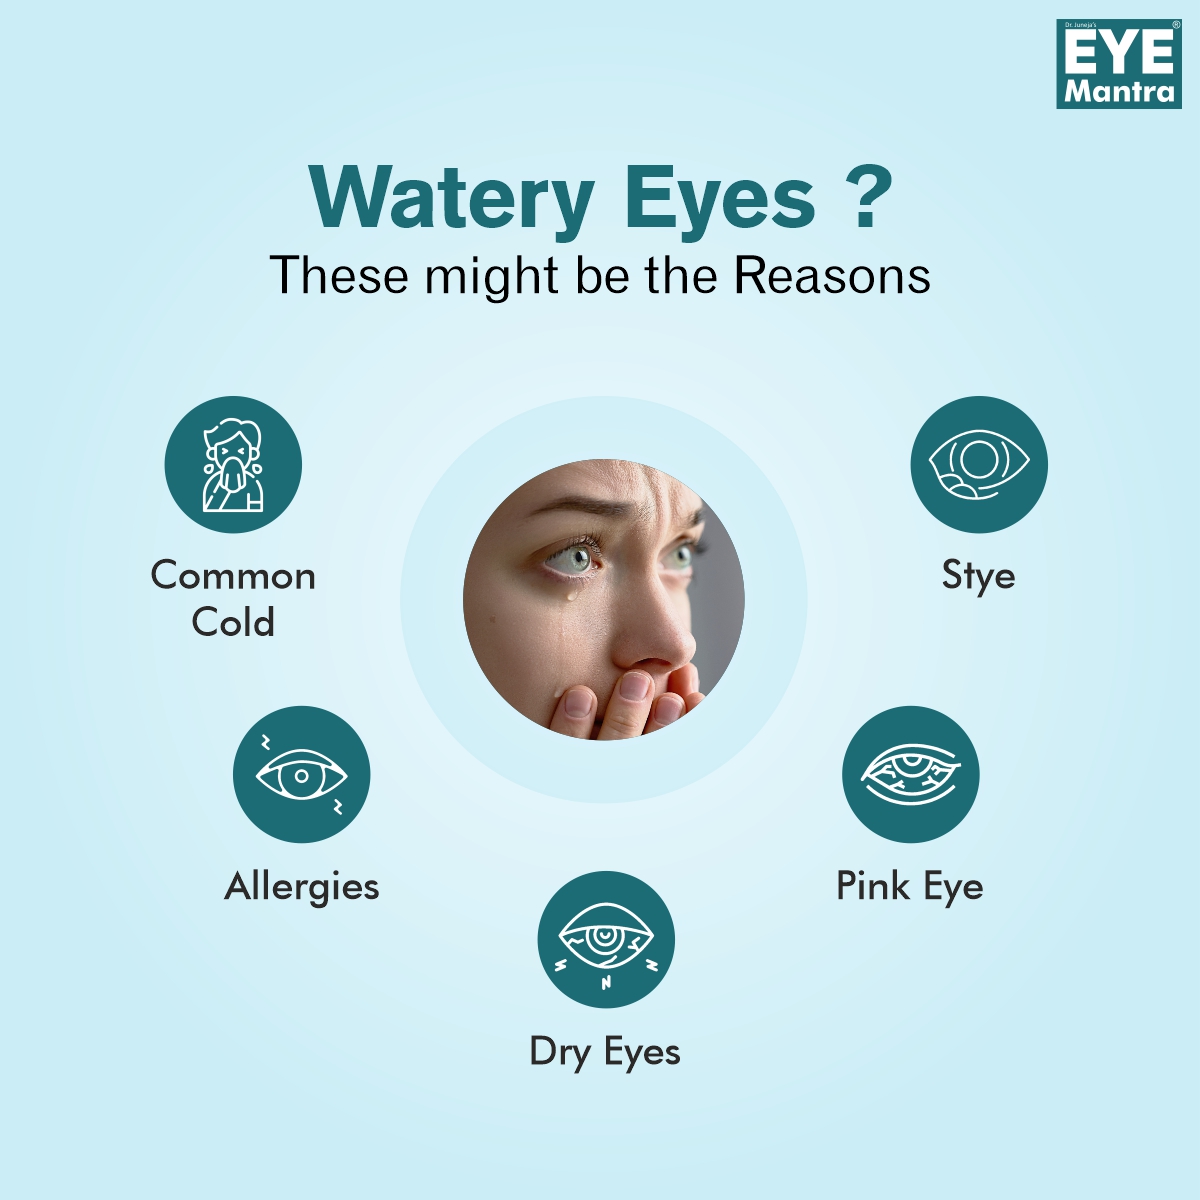 Watery eyes are a common issue found in people. Well, reasons can be different for the problem, however with the right medications, treatments and consultation with an eye professional can help.

#EyeMantra #healthyeyes #eyecaretips #eyecareforall #EyeDiscomfort #WateryEyes